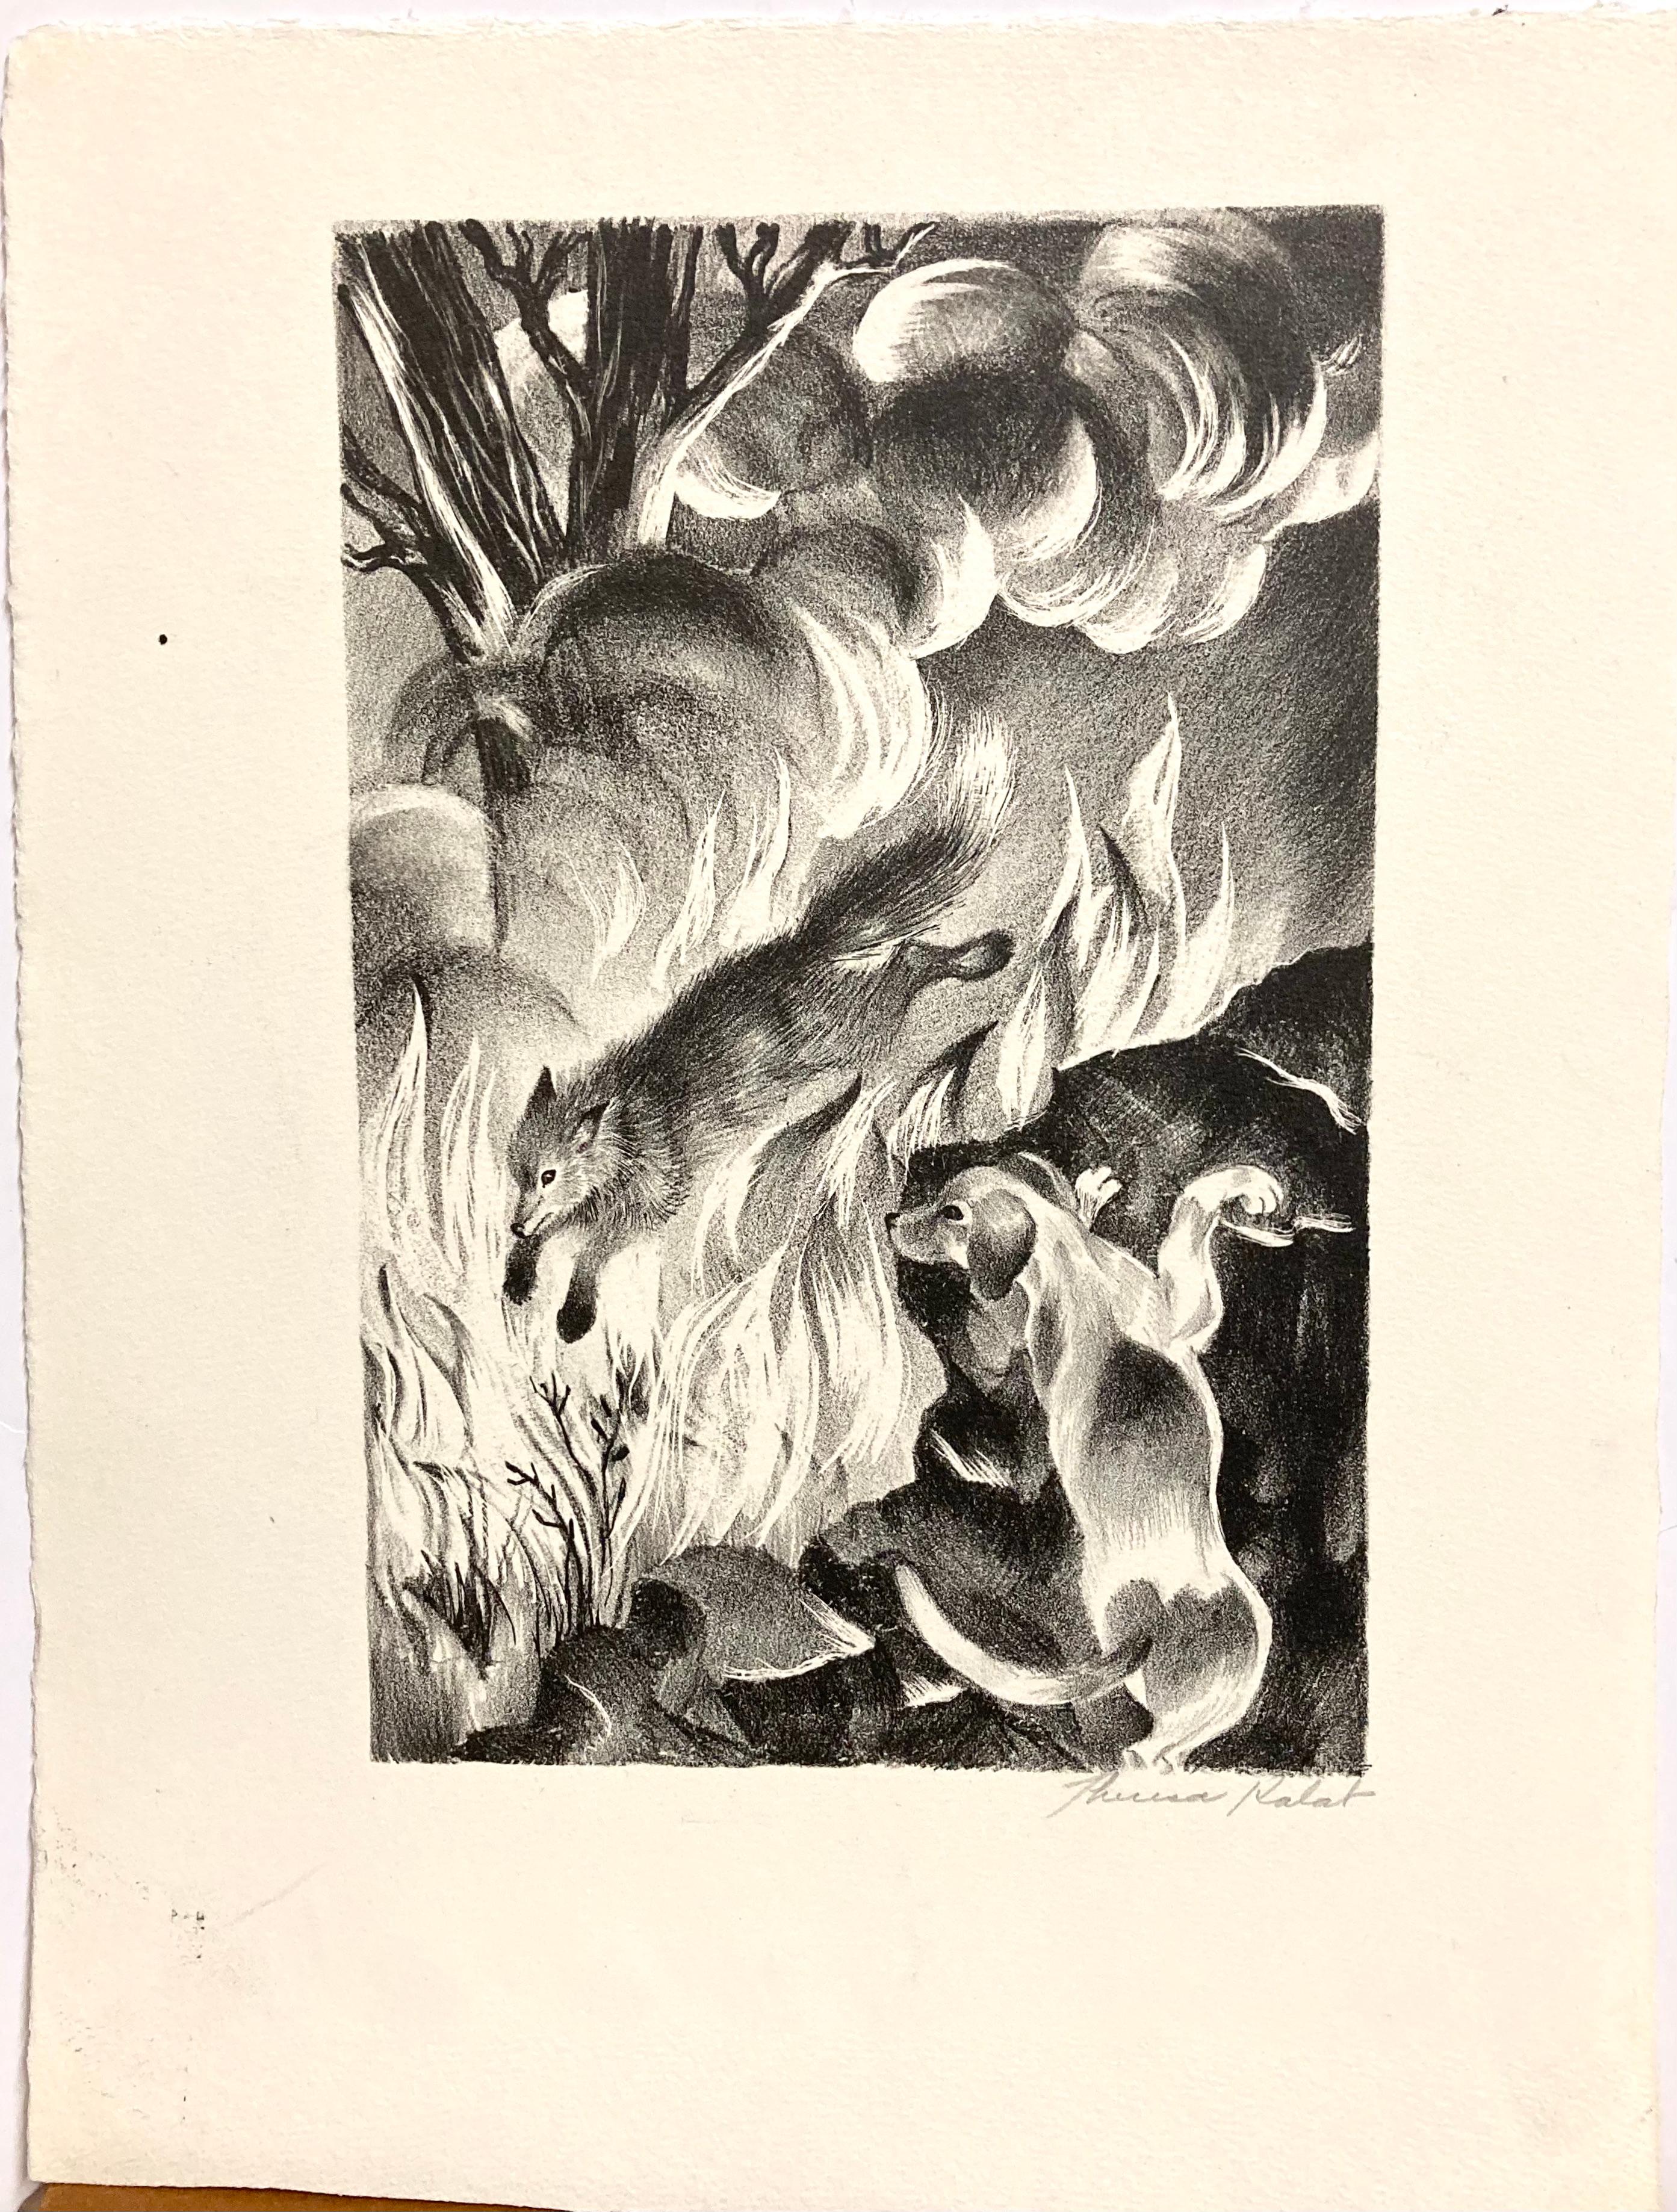 While nothing is known about this artist (maybe even the spelling of the last name?), the drawing is so skilled and the composition compelling that there MUST be other work! And use of the subject as a lithograph certainly implies a familiarity with